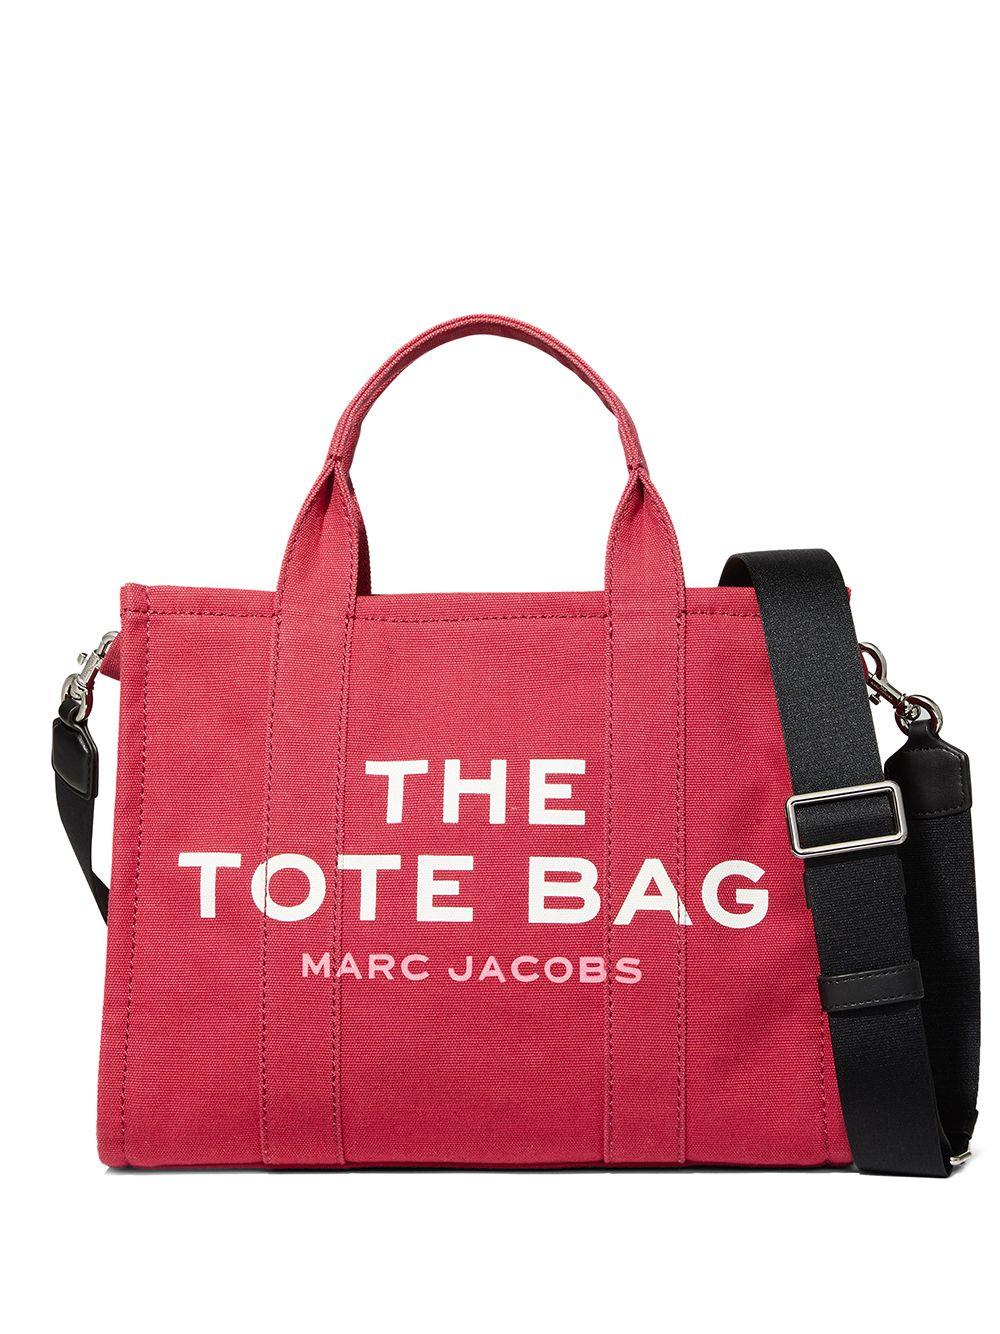 The Tote Bag Marc Jacobs  Red Mini Leather Tote Bag Review 